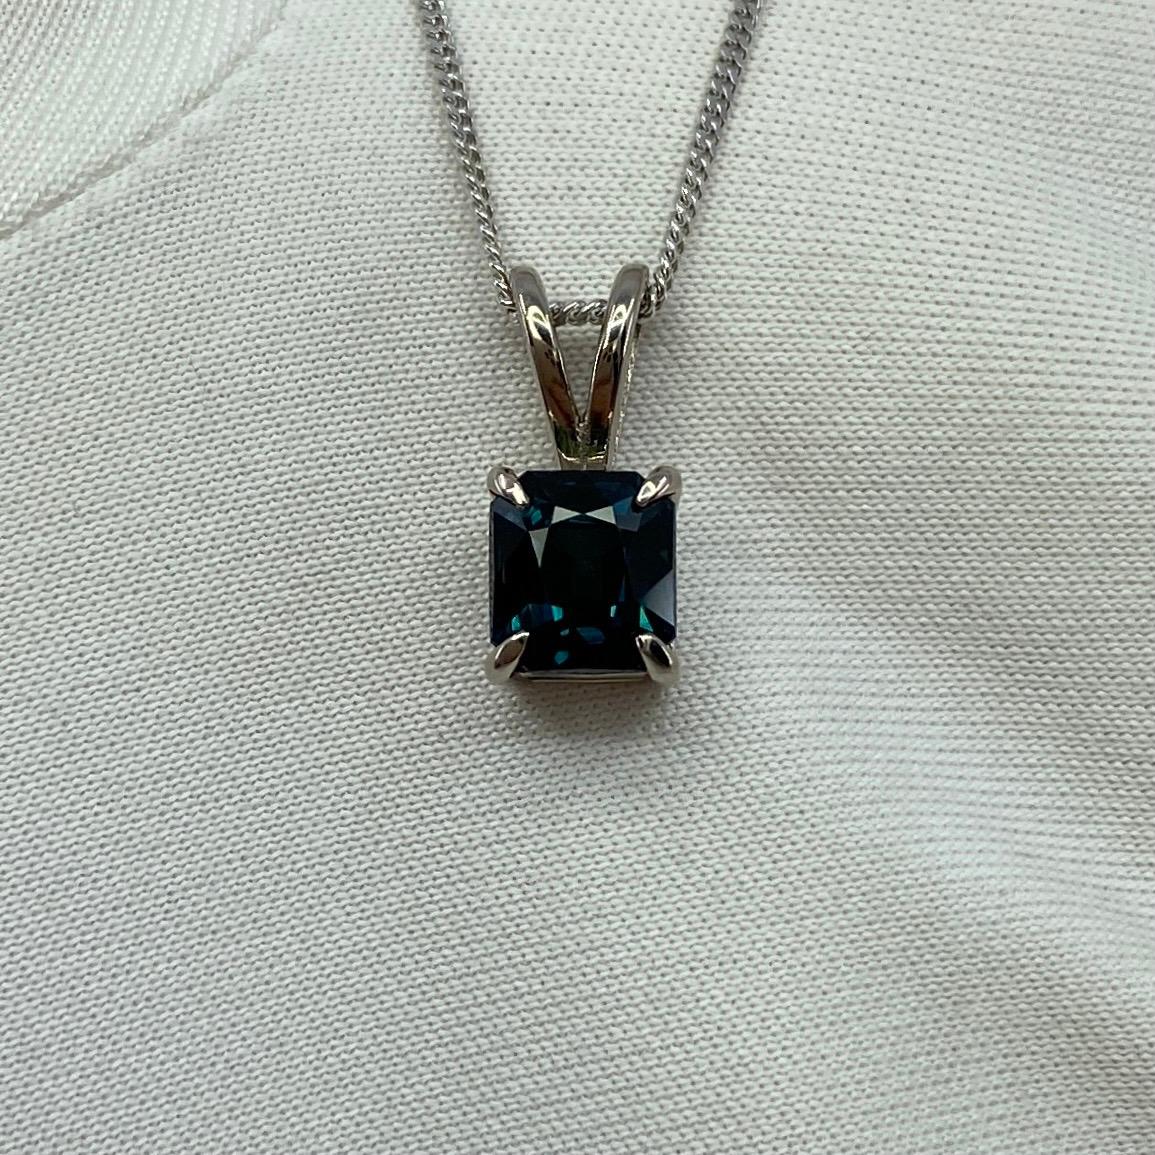 Women's or Men's 1.44ct IGI Certified Deep Teal Blue Untreated Sapphire 18k White Gold Pendant For Sale